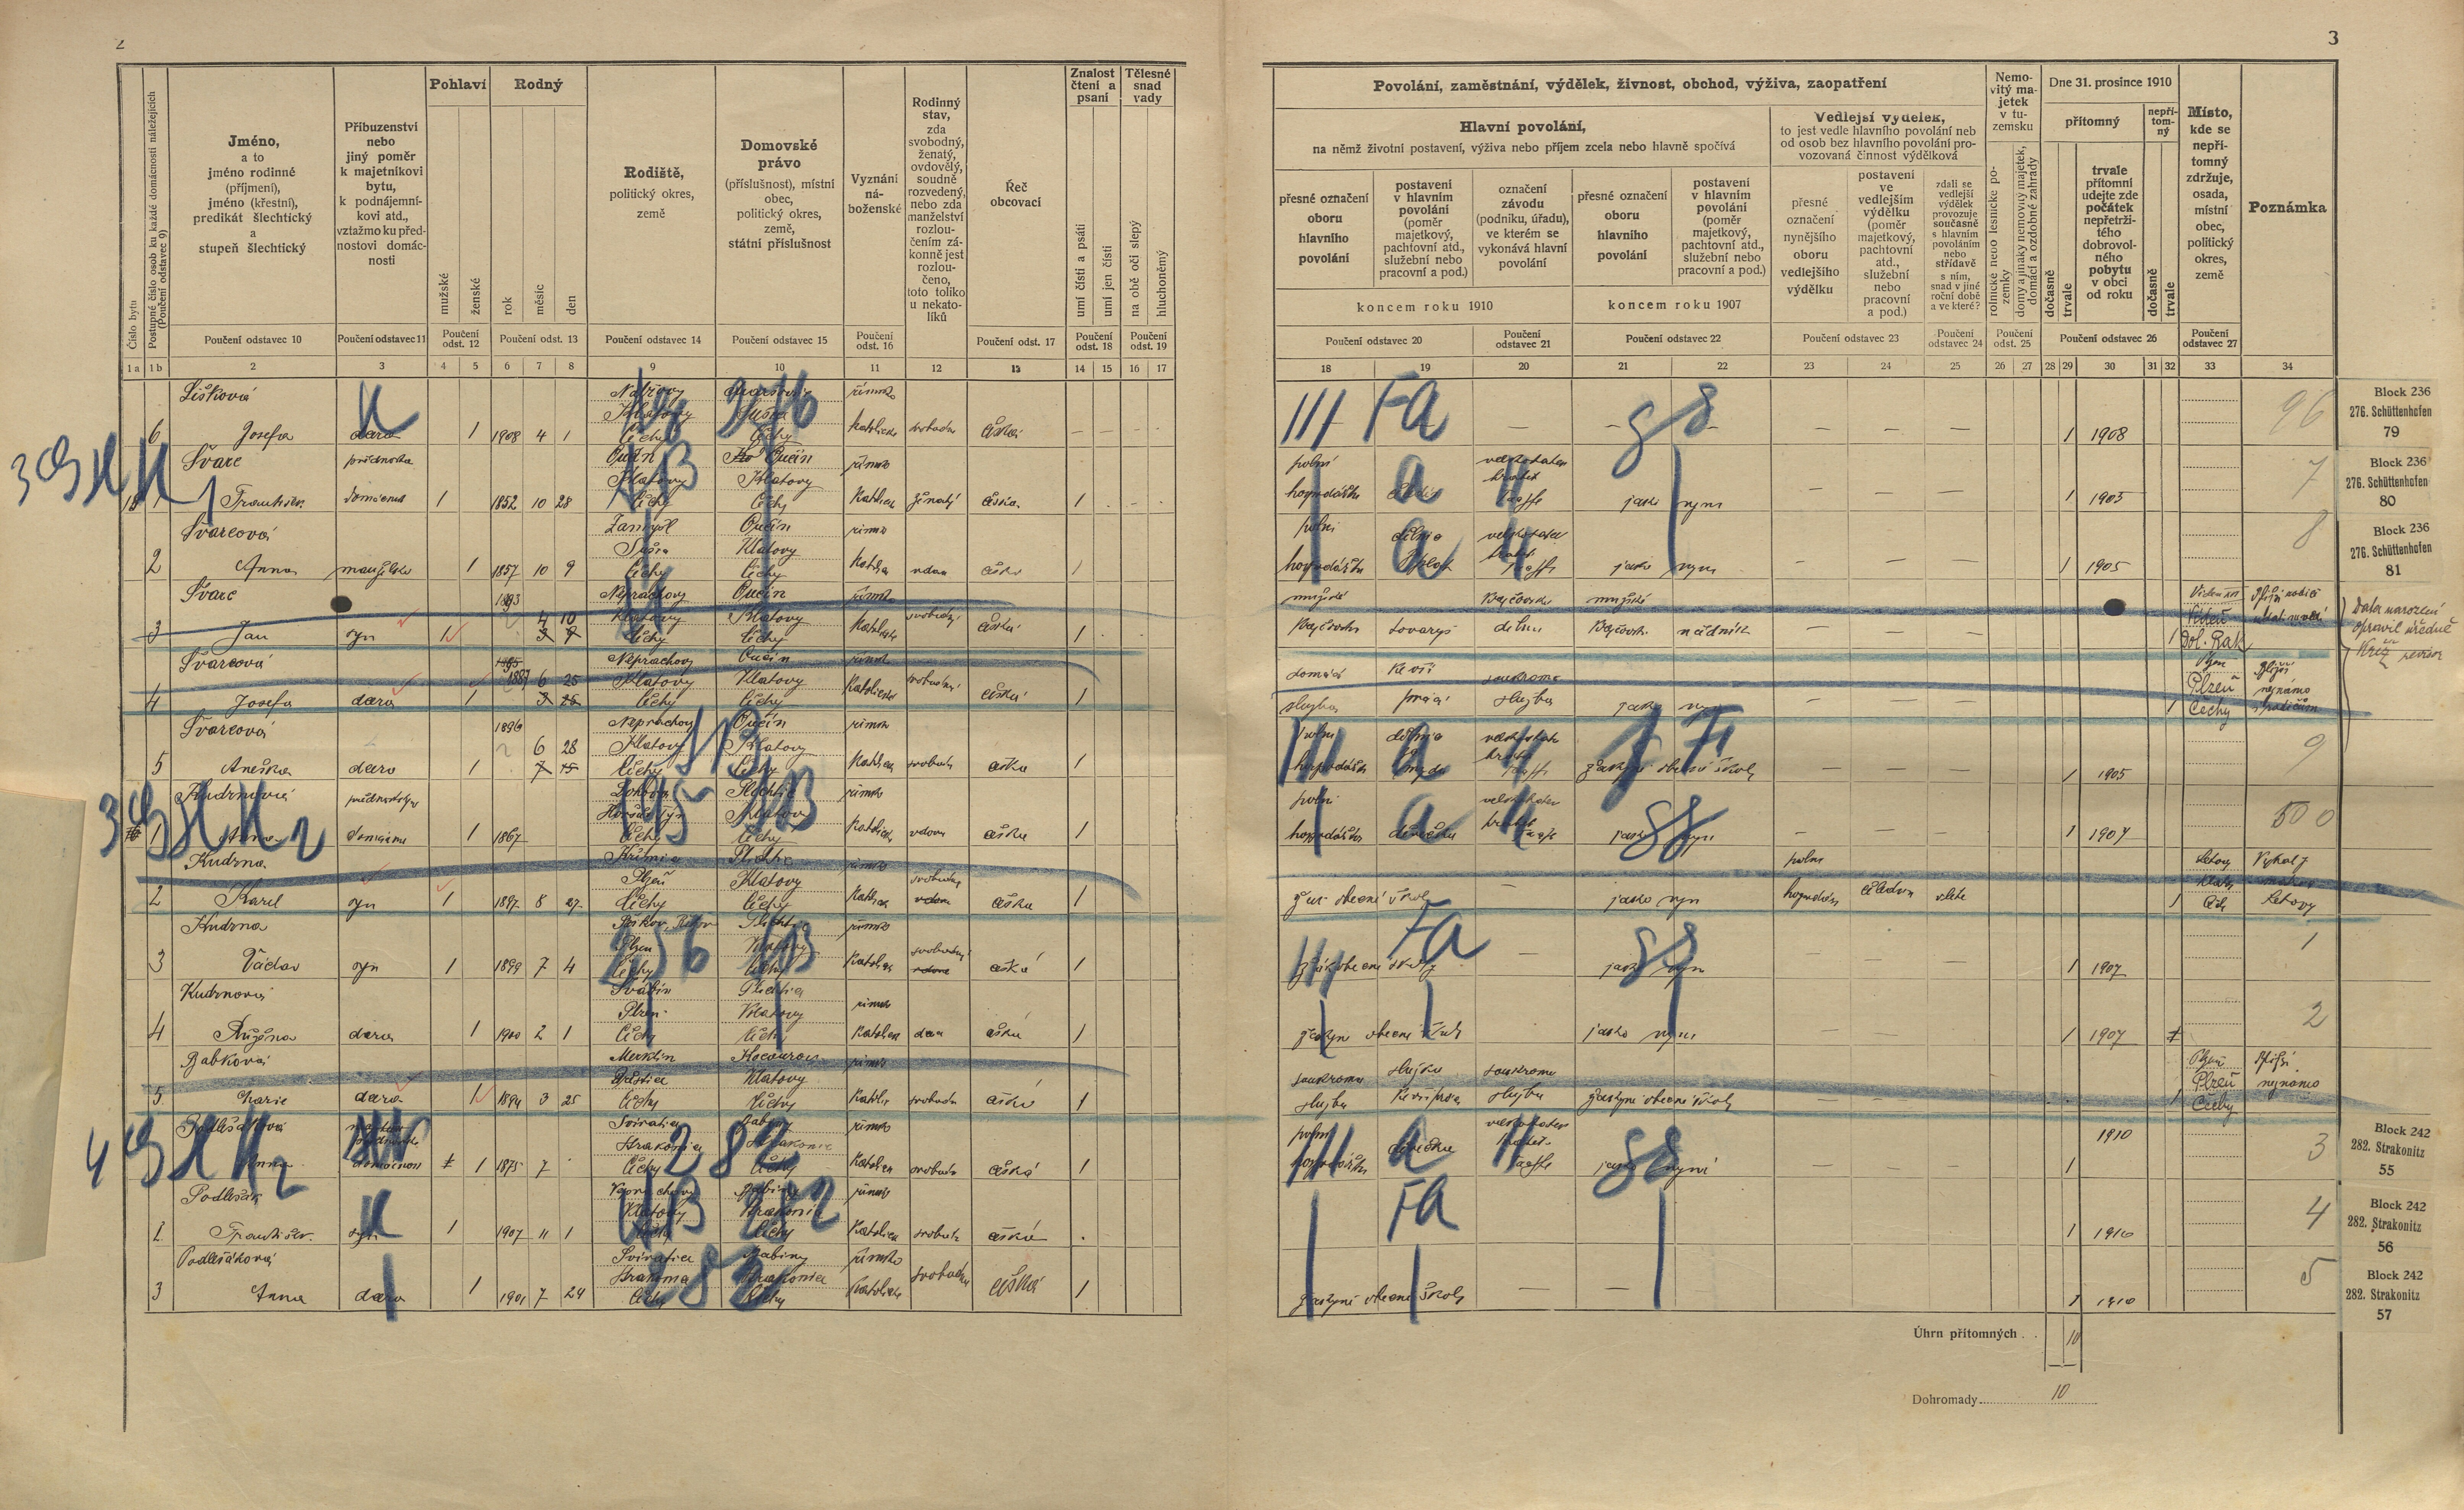 30. soap-kt_01159_census-1910-nalzovy-cp001_0300